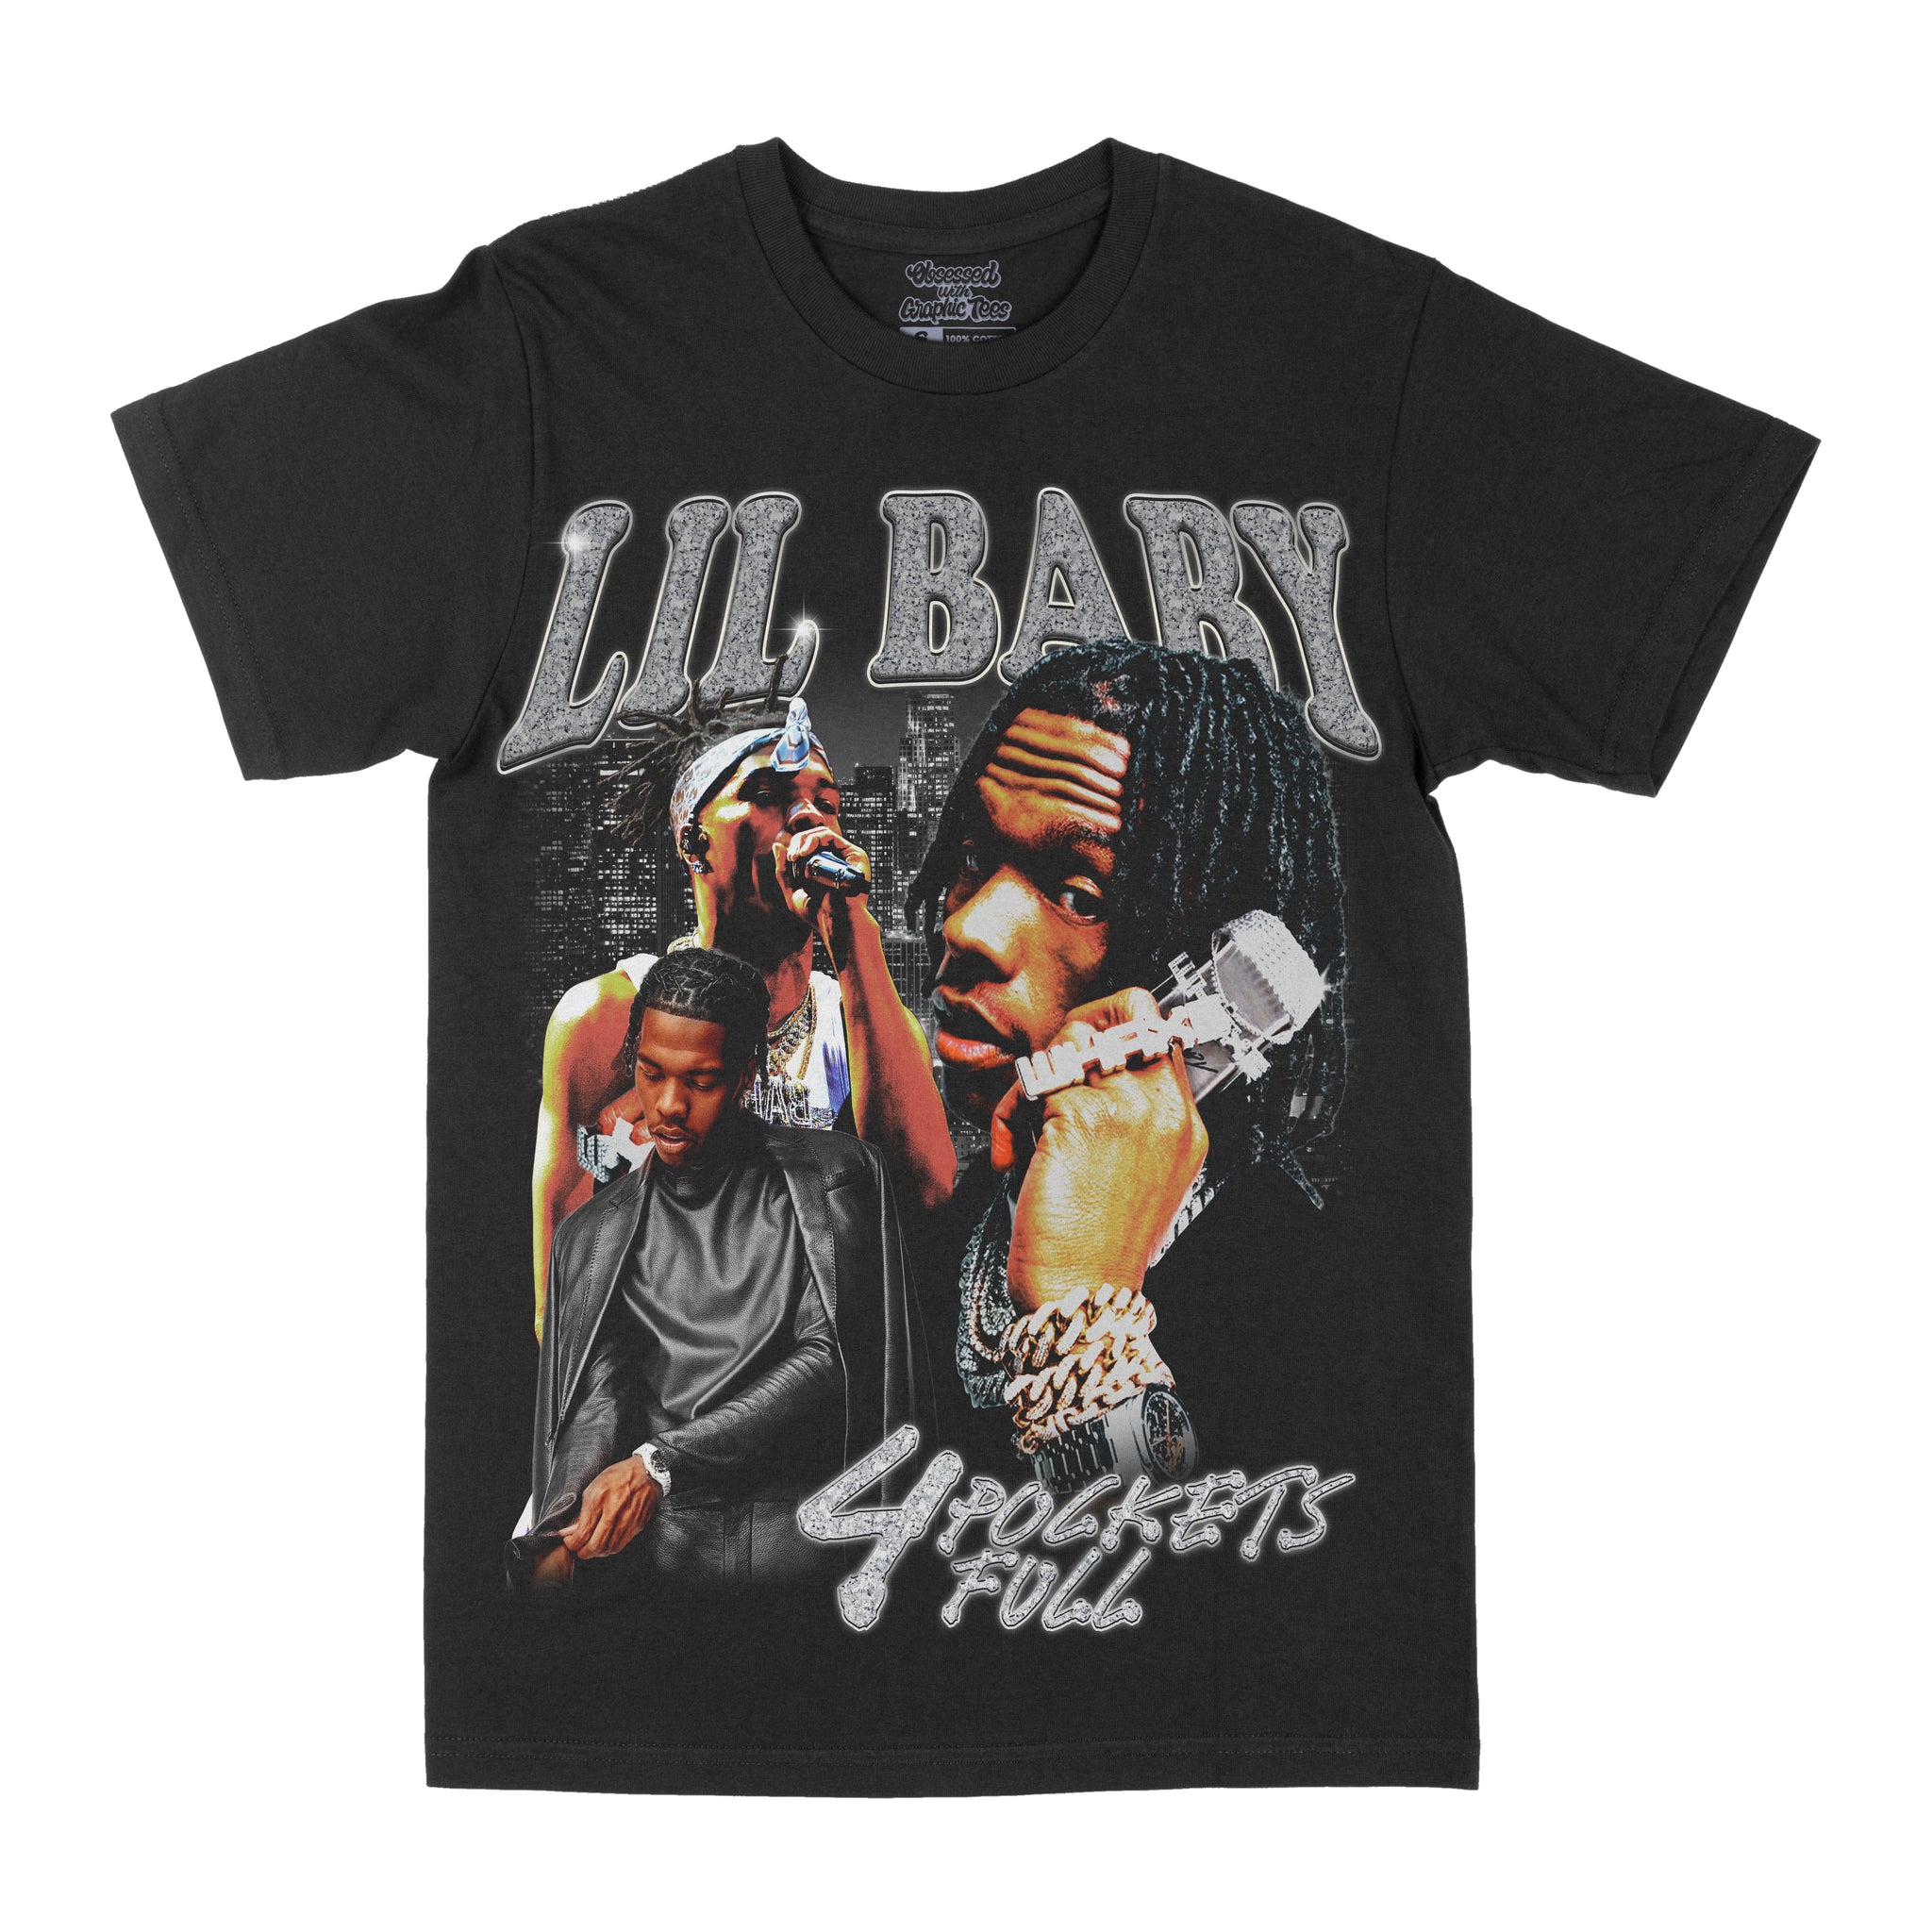 Lil Baby "4 Pockets Full" Graphic Tee